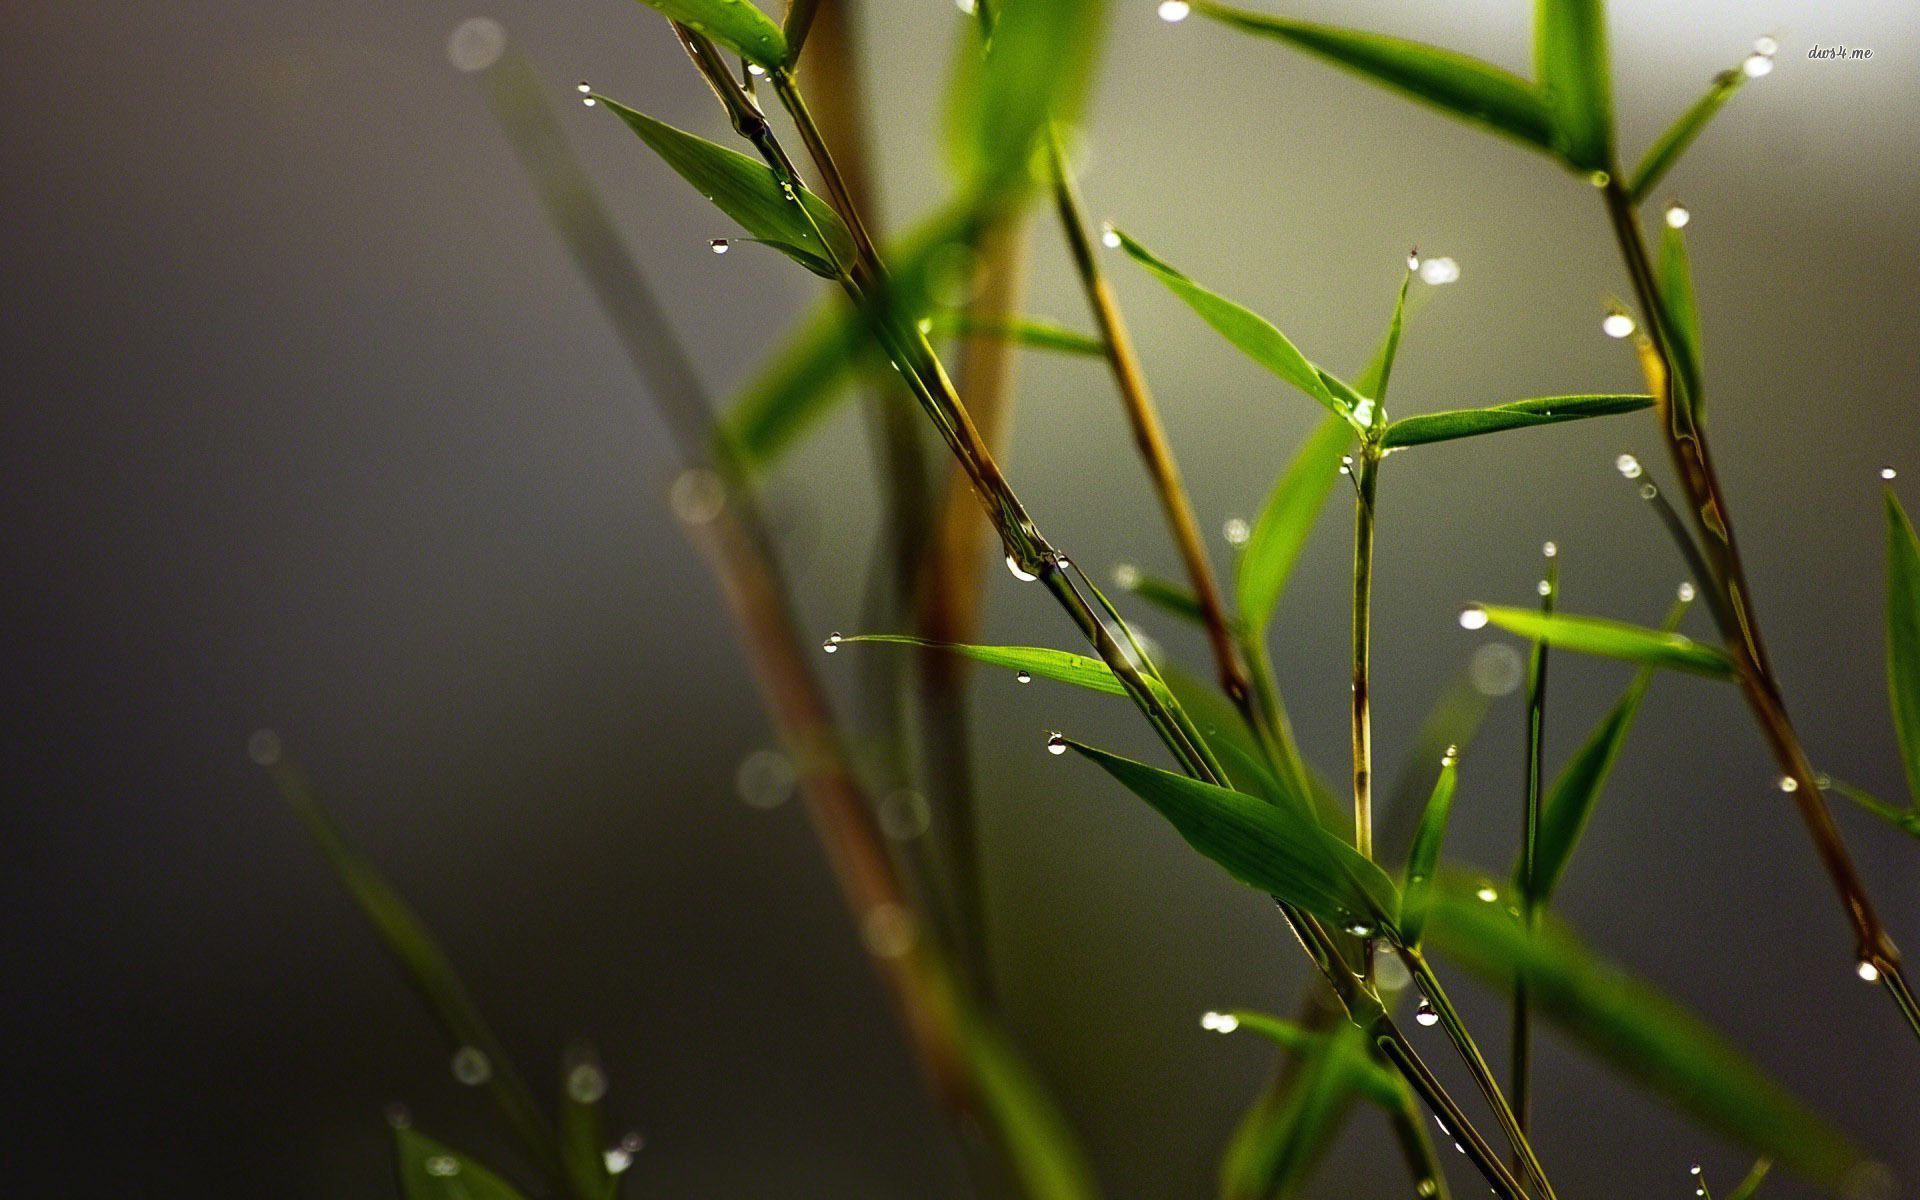 Dew drops on bamboo wallpaper - Photography wallpapers - #16588